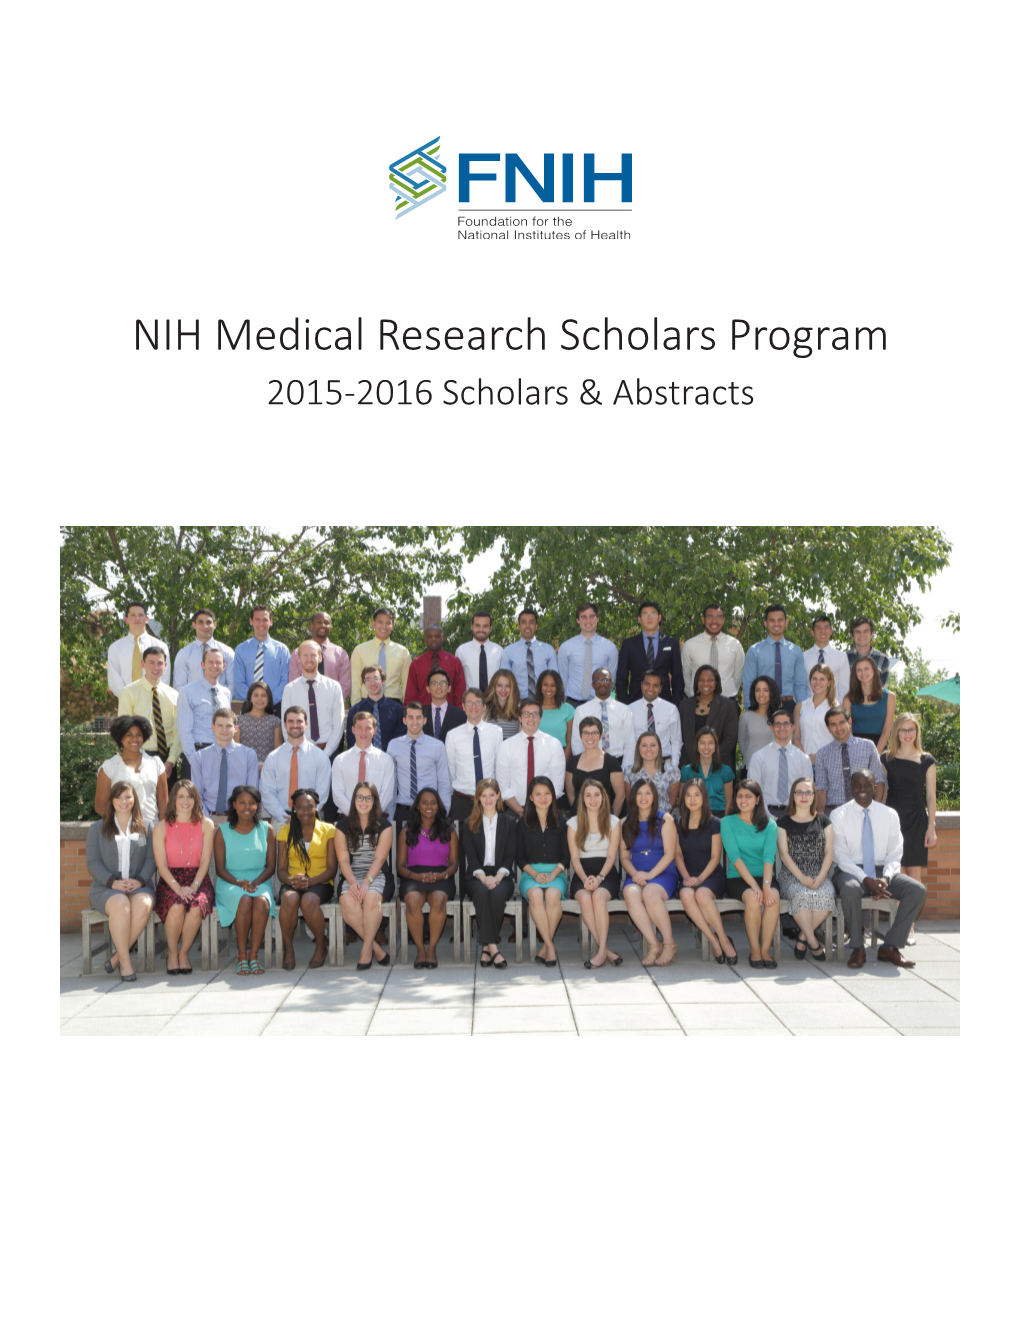 2015-2016 Scholars & Abstracts About the Medical Research Scholars Program